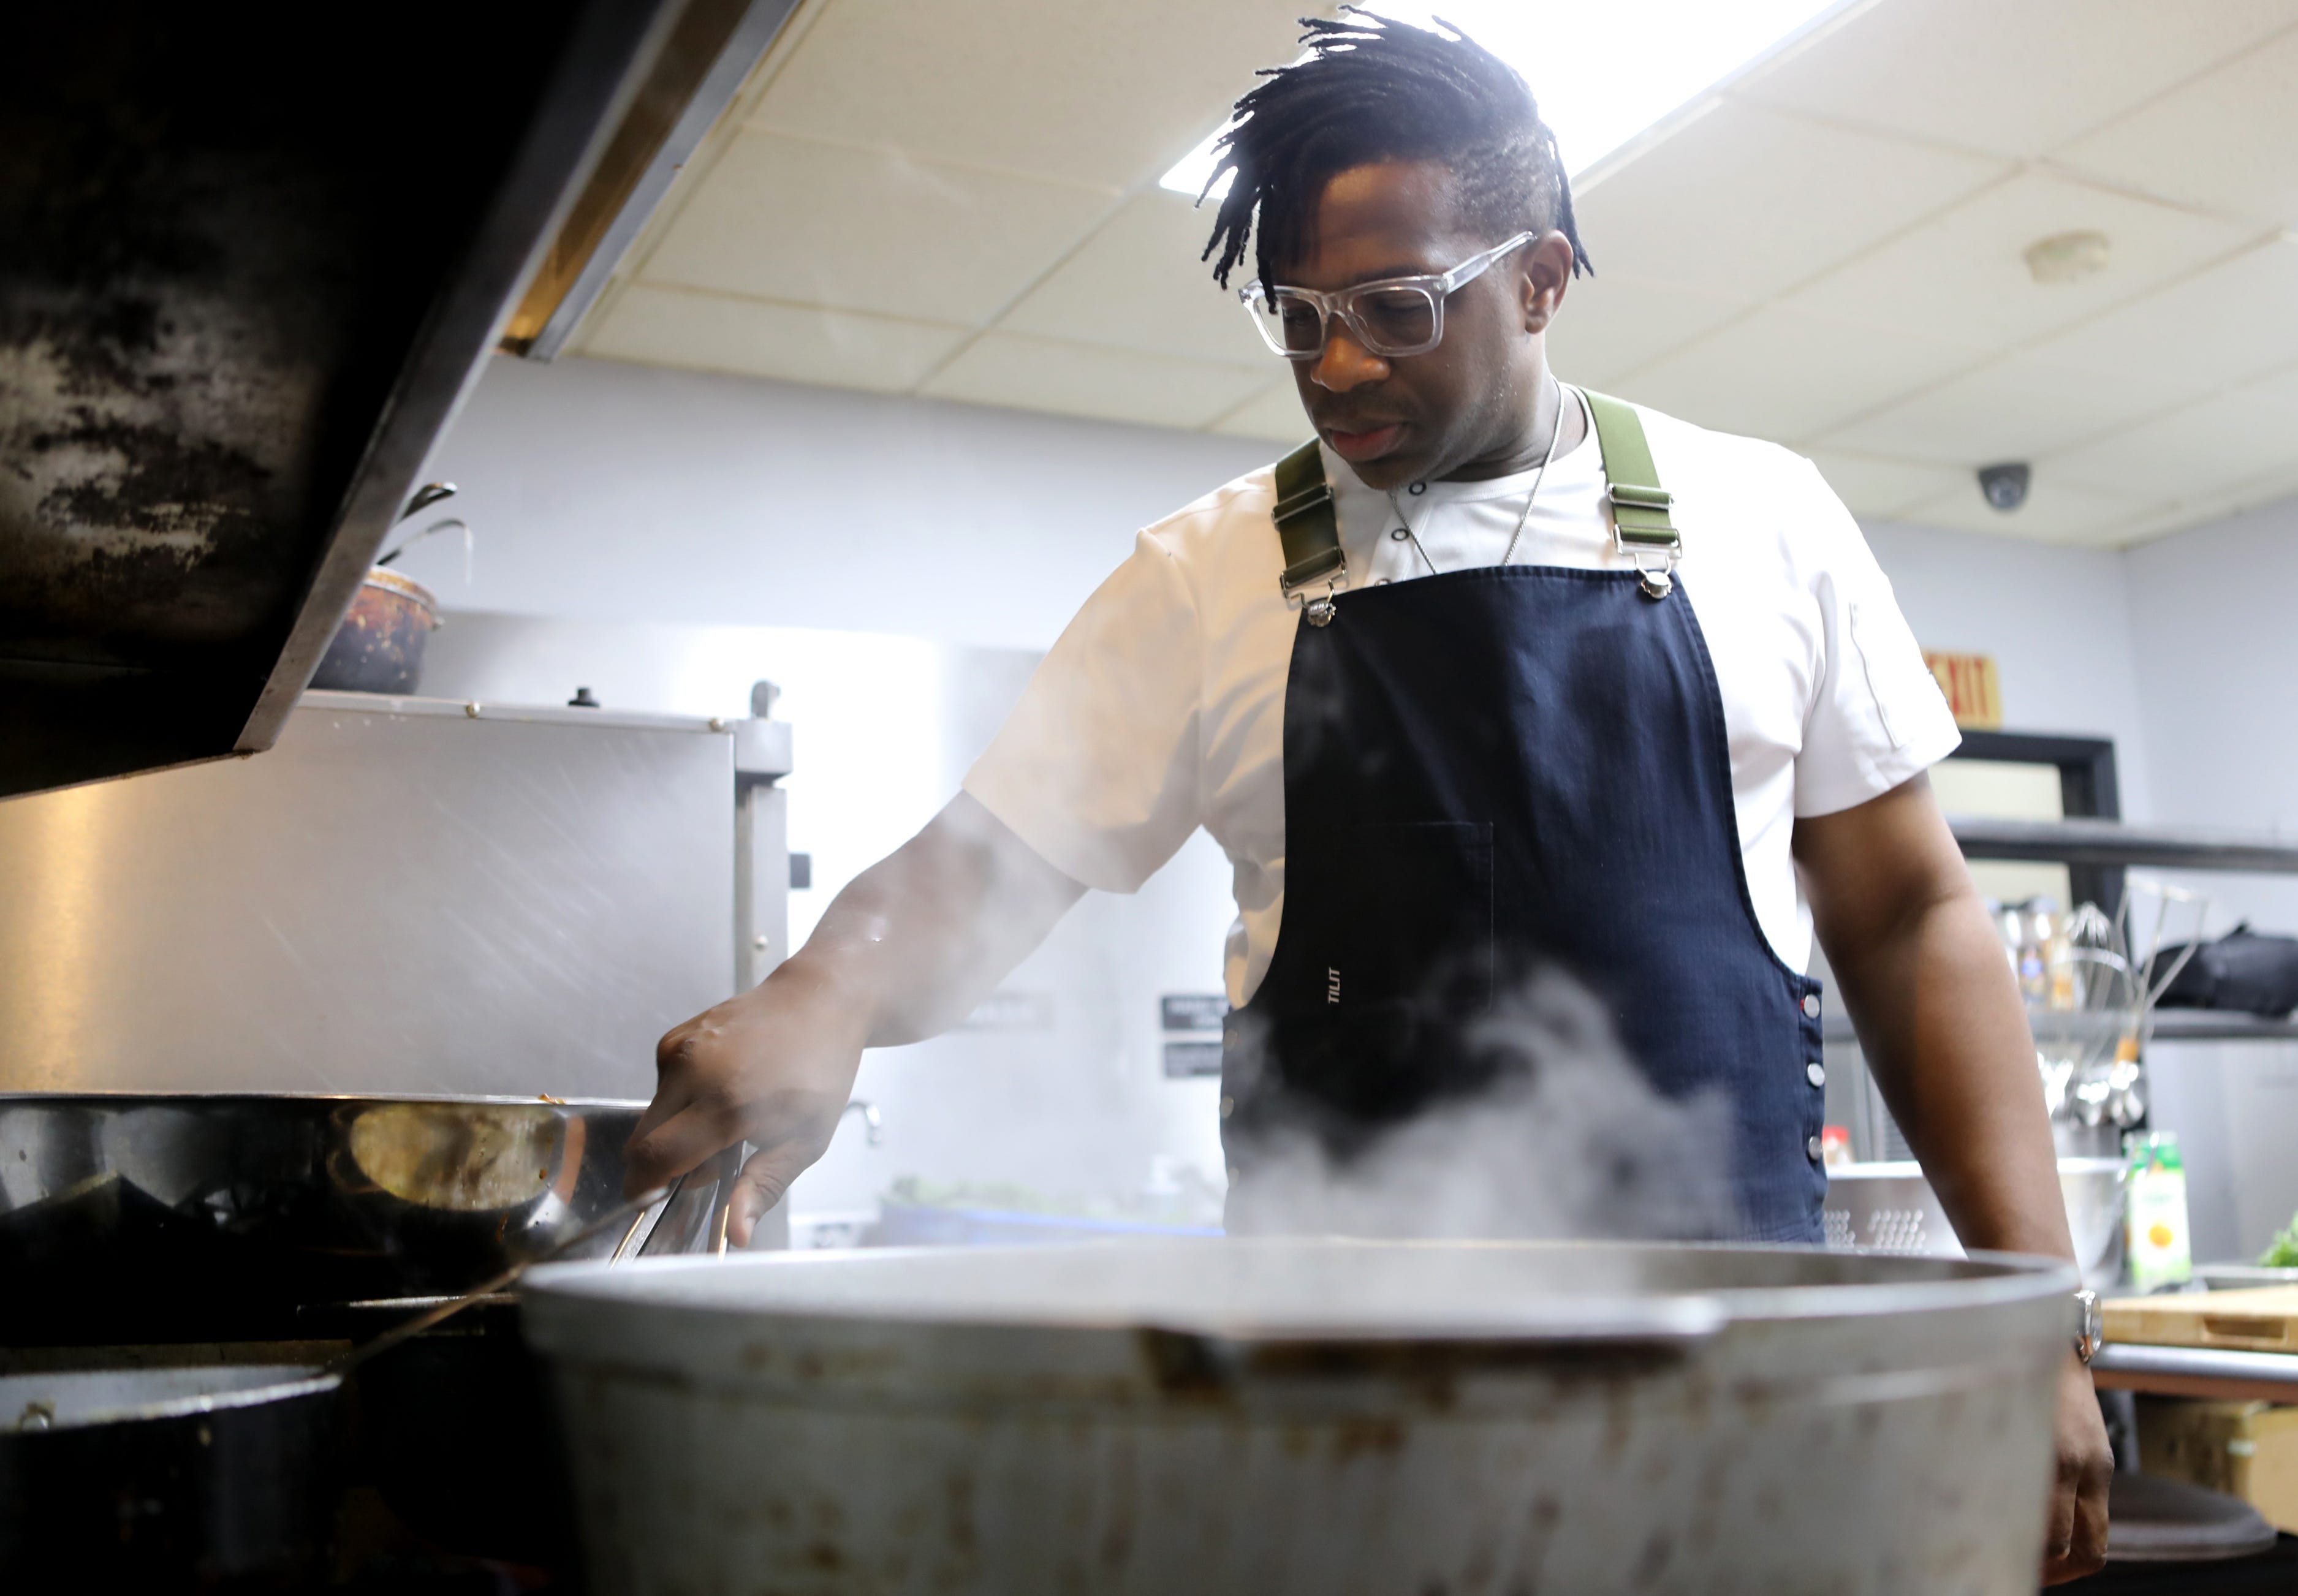 Ameer Natson, acclaimed chef from Newark and owner of Fresh Chef Online, said everything he does "comes from that place of soul." Above, he cooks buttermilk brine southern fried cajun chicken.